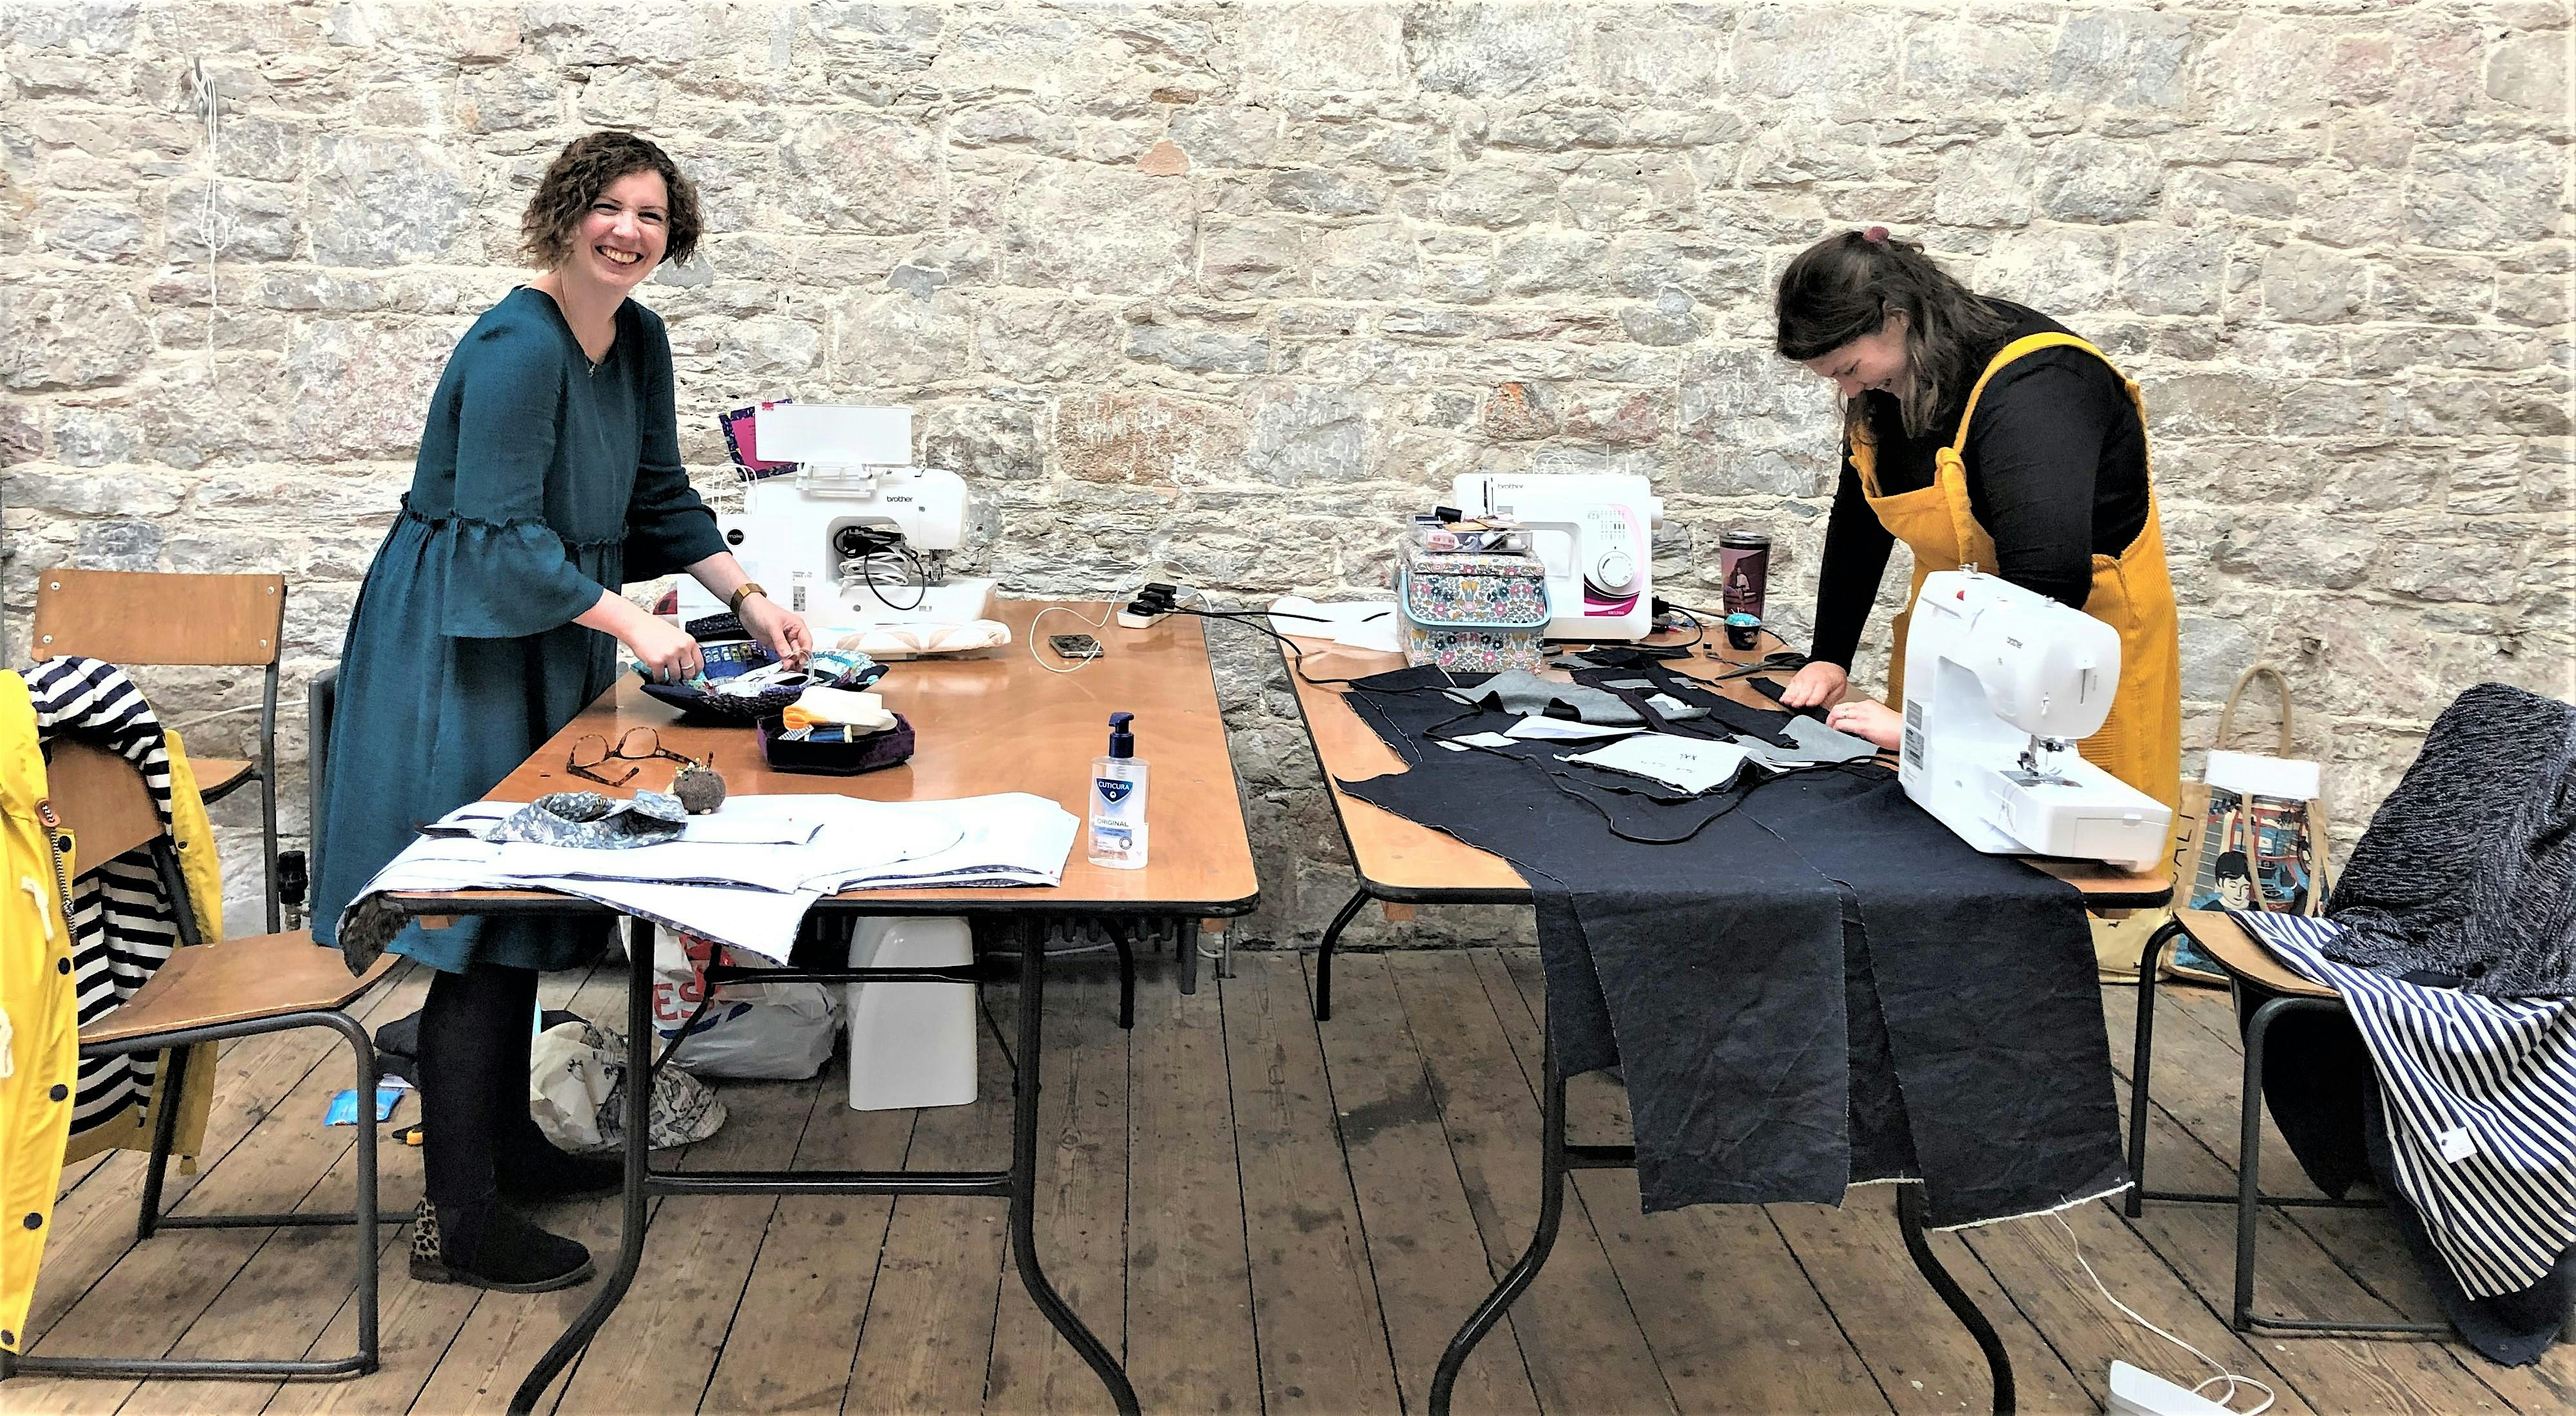 Sewing Socially: Plymouth Sewing Community Fun and Productive Gathering!